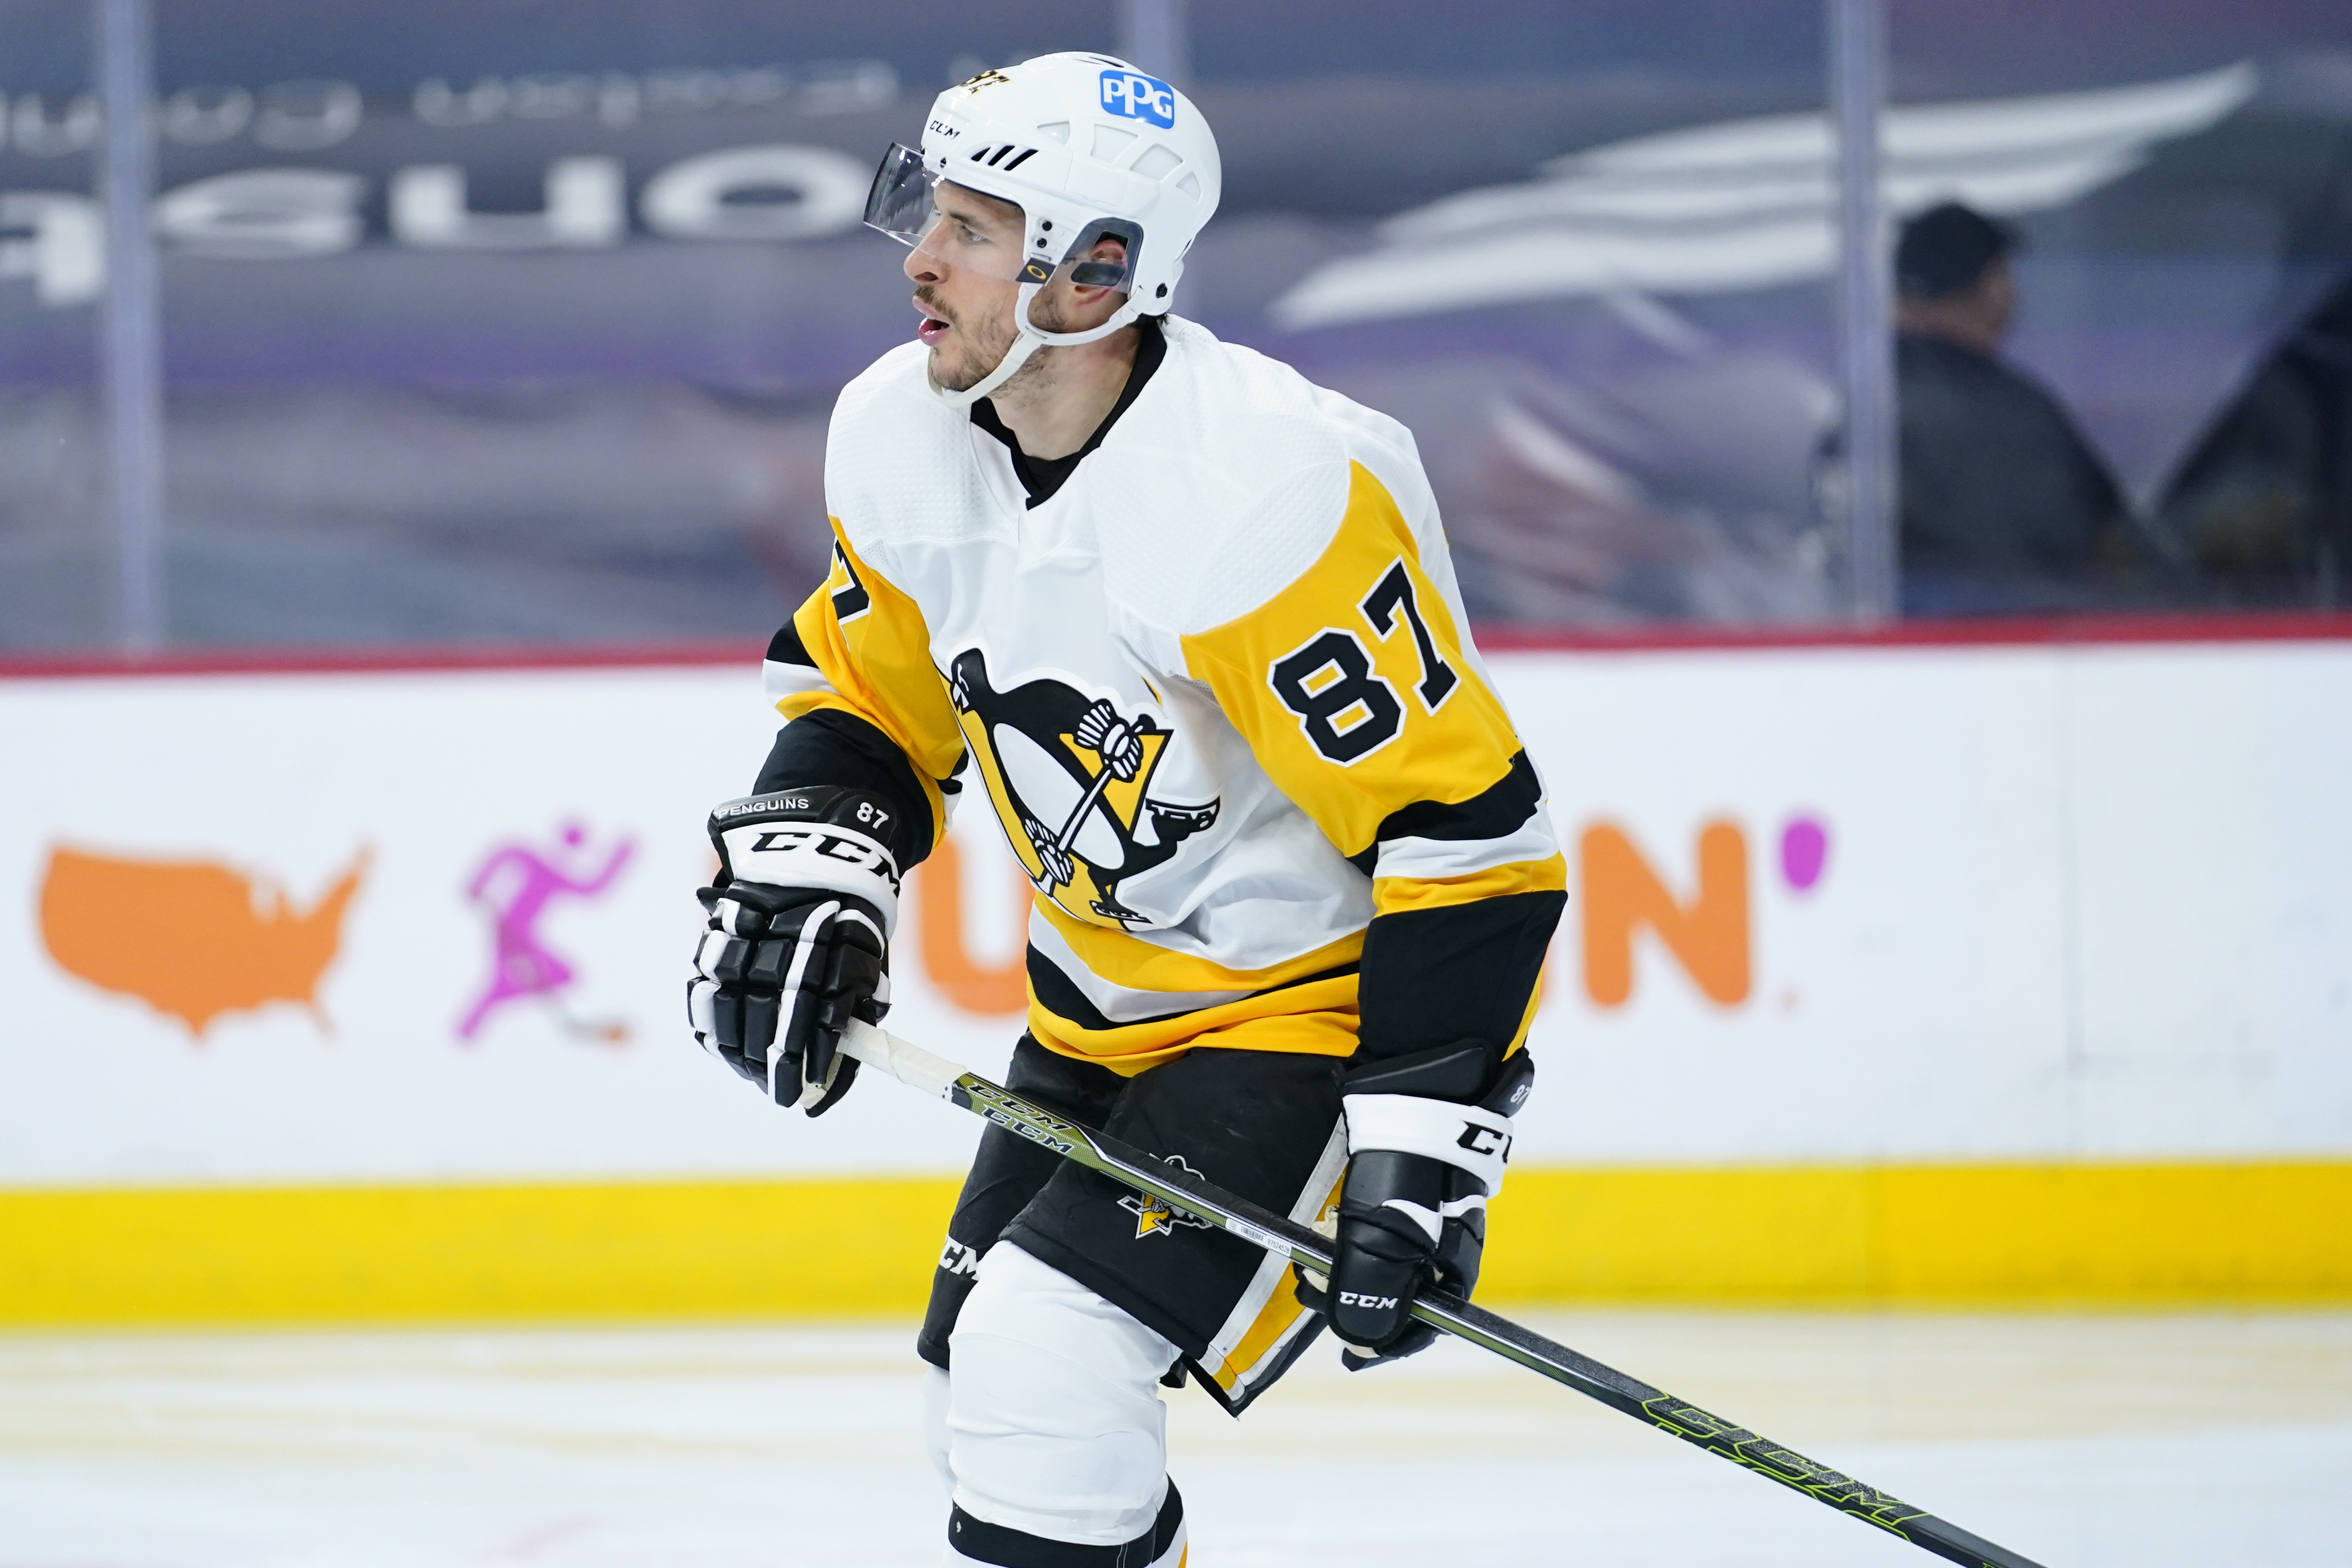 Sidney Crosby skates with Penguins for first time since wrist surgery